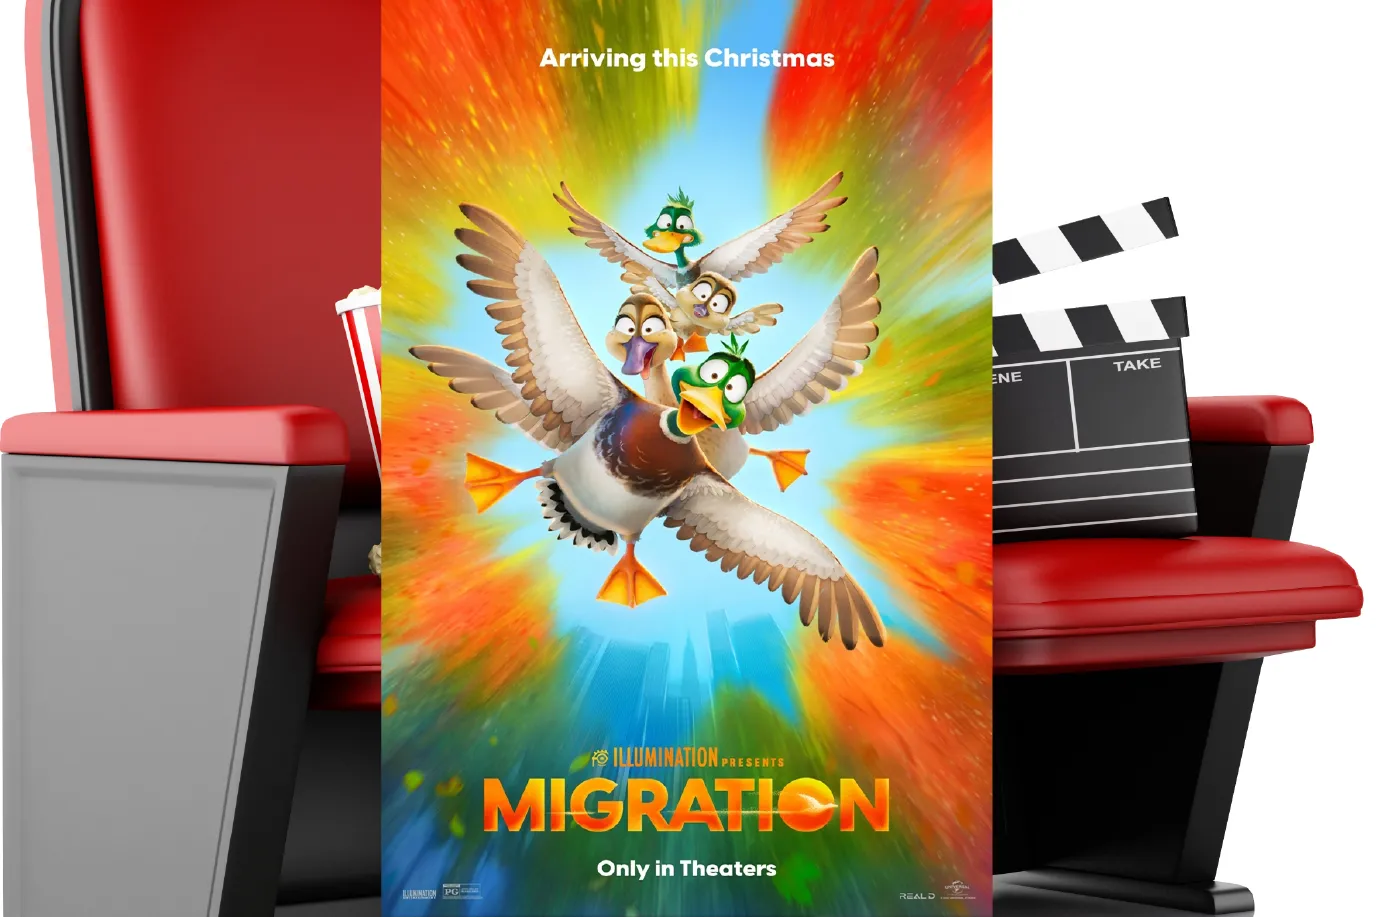 Movie poster for "Migration"